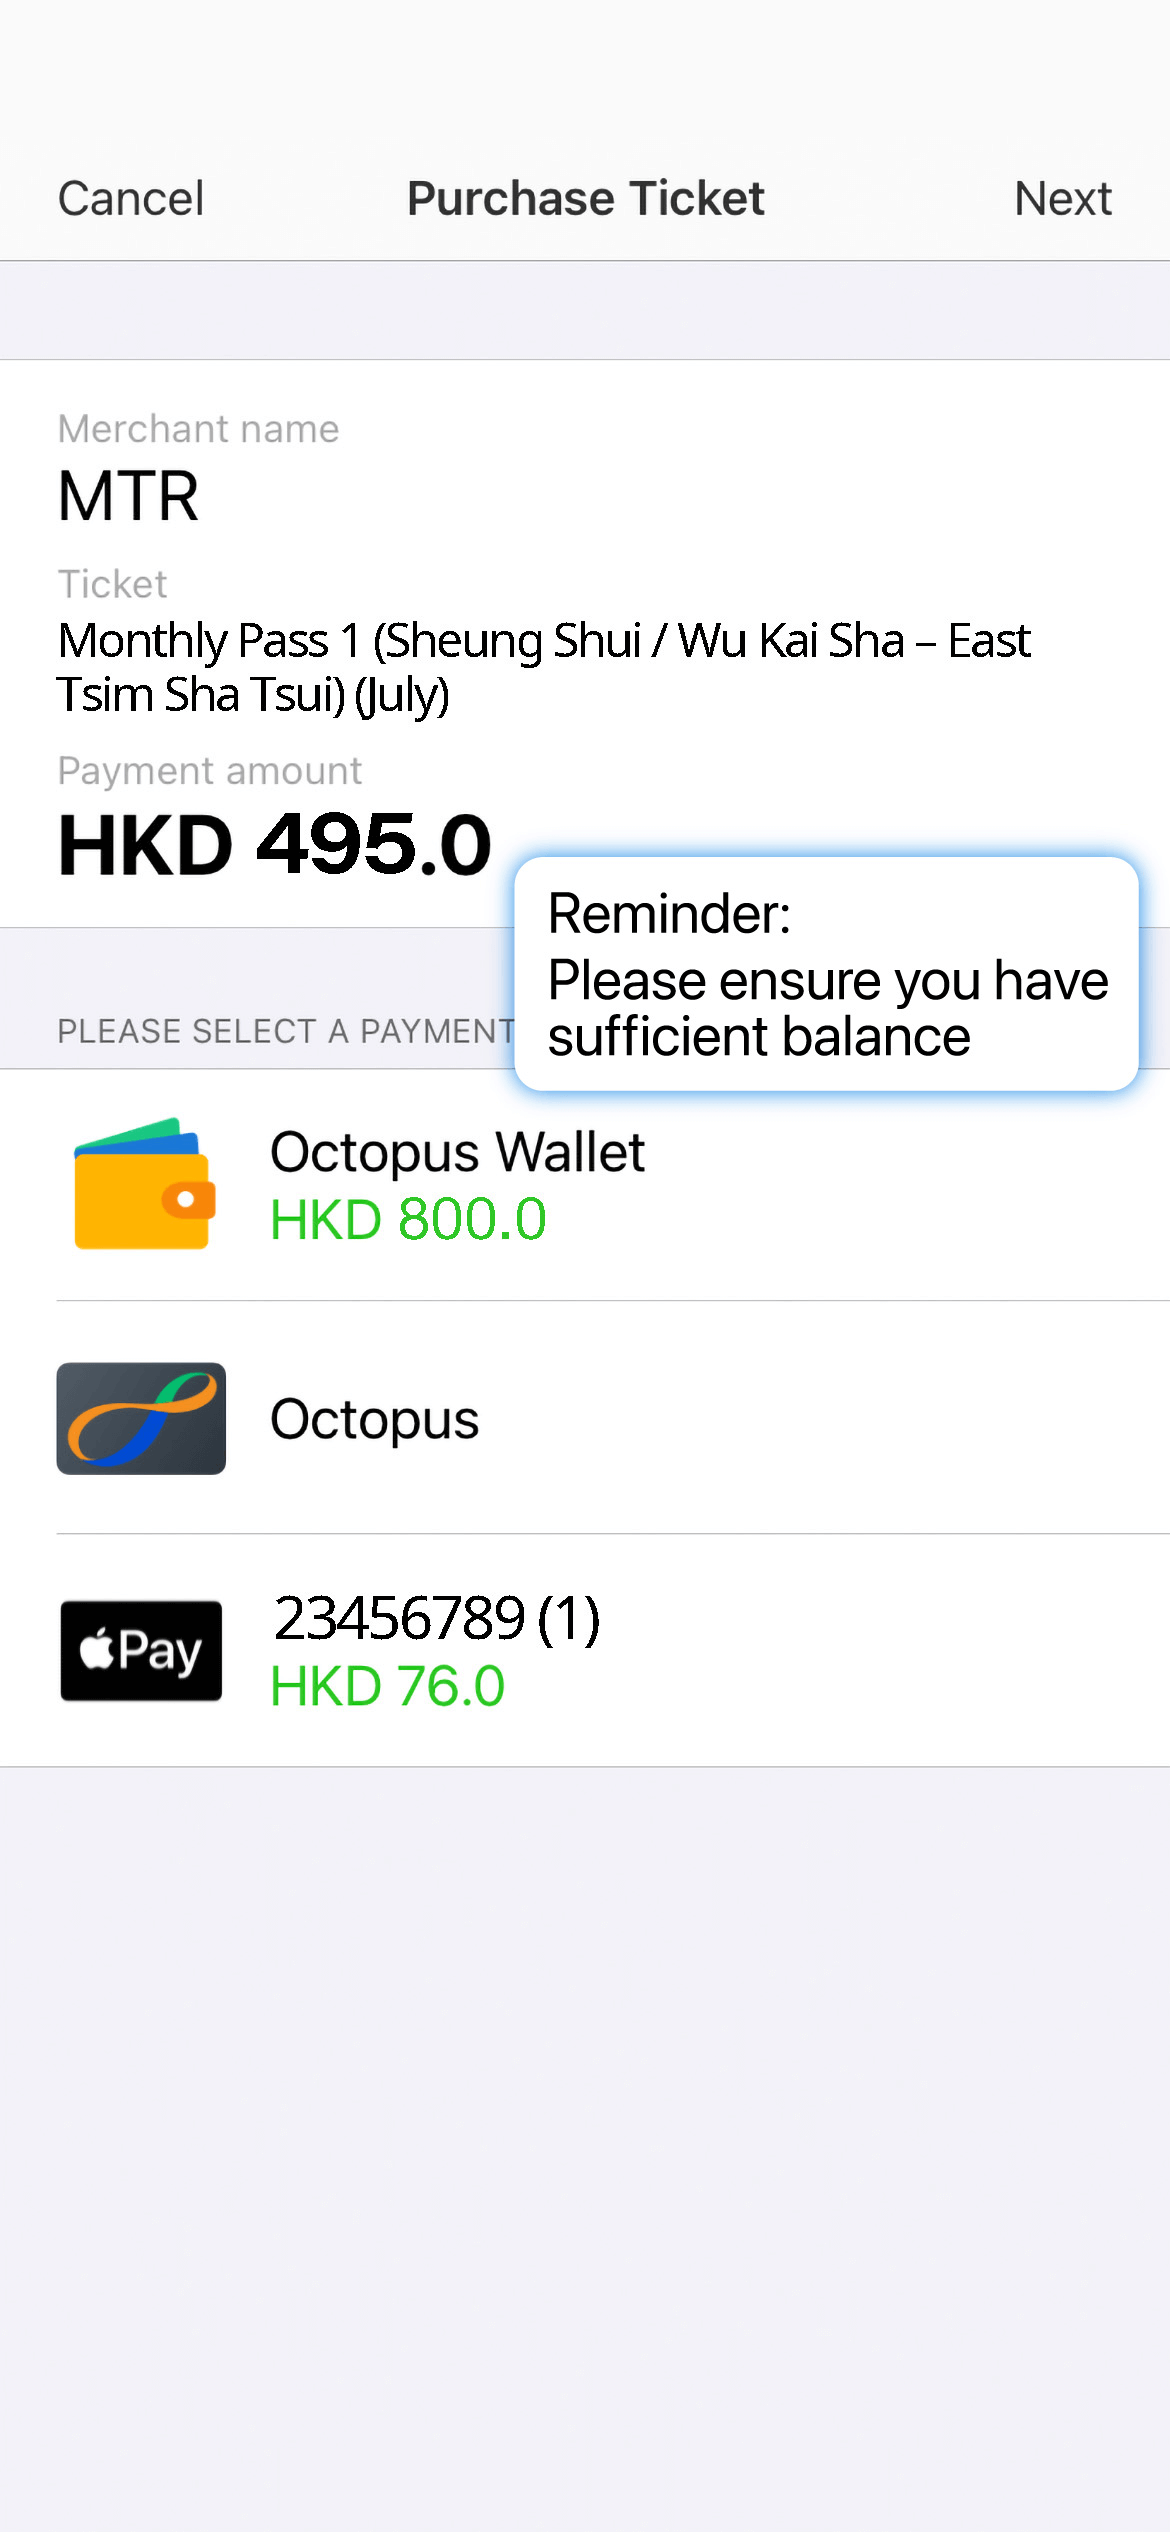 You will be redirected to Octopus App to select a payment method